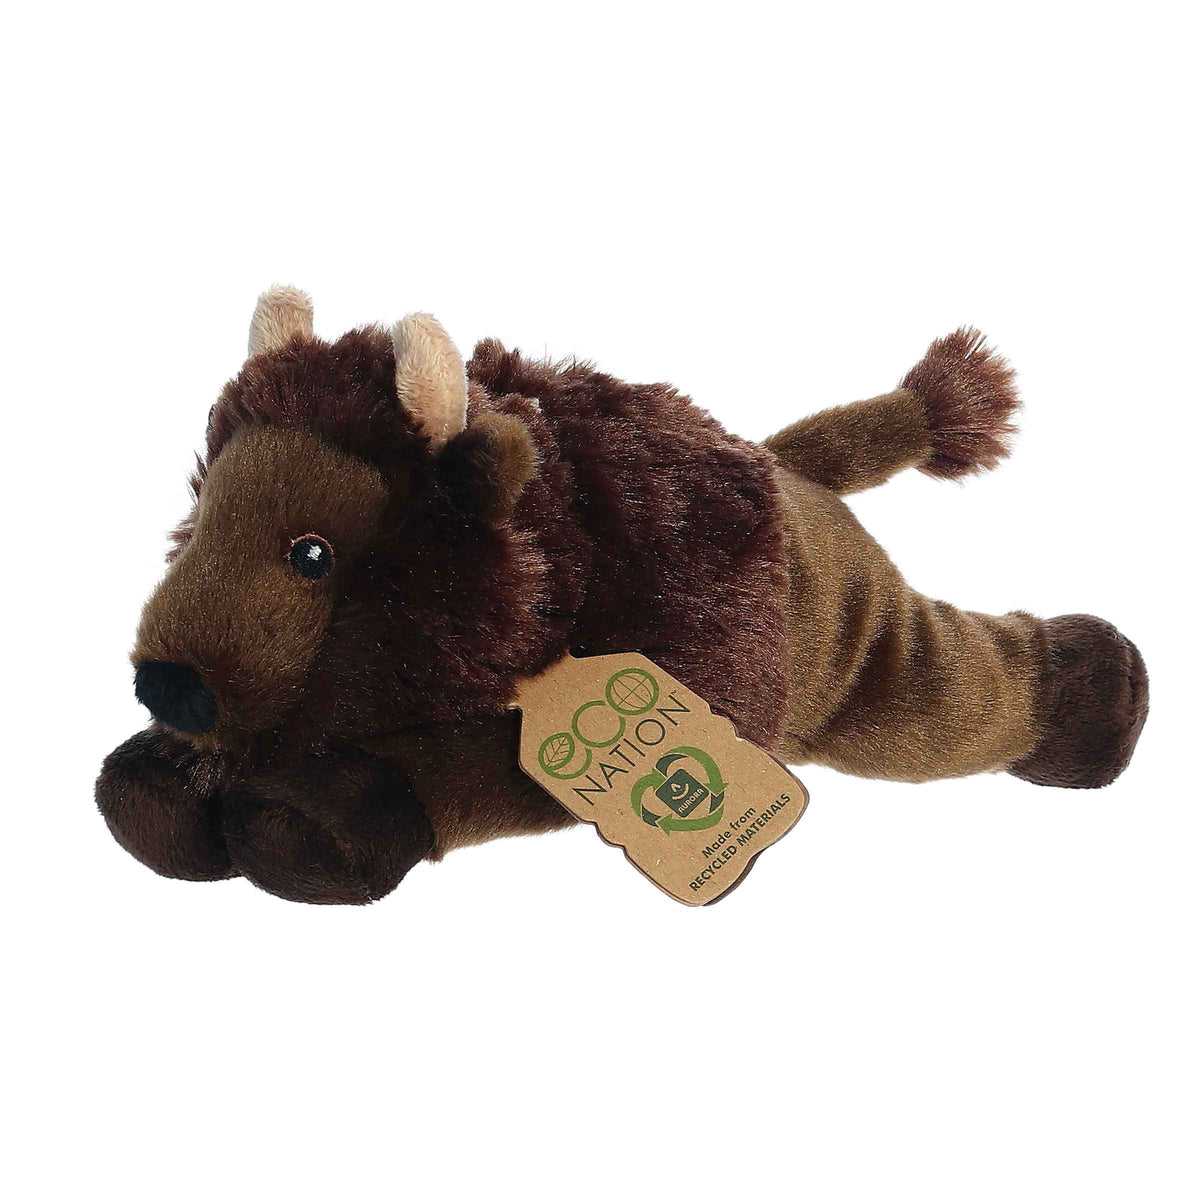 8'' Bison plush from Eco Softies, detailed and durable, made from recycled materials.